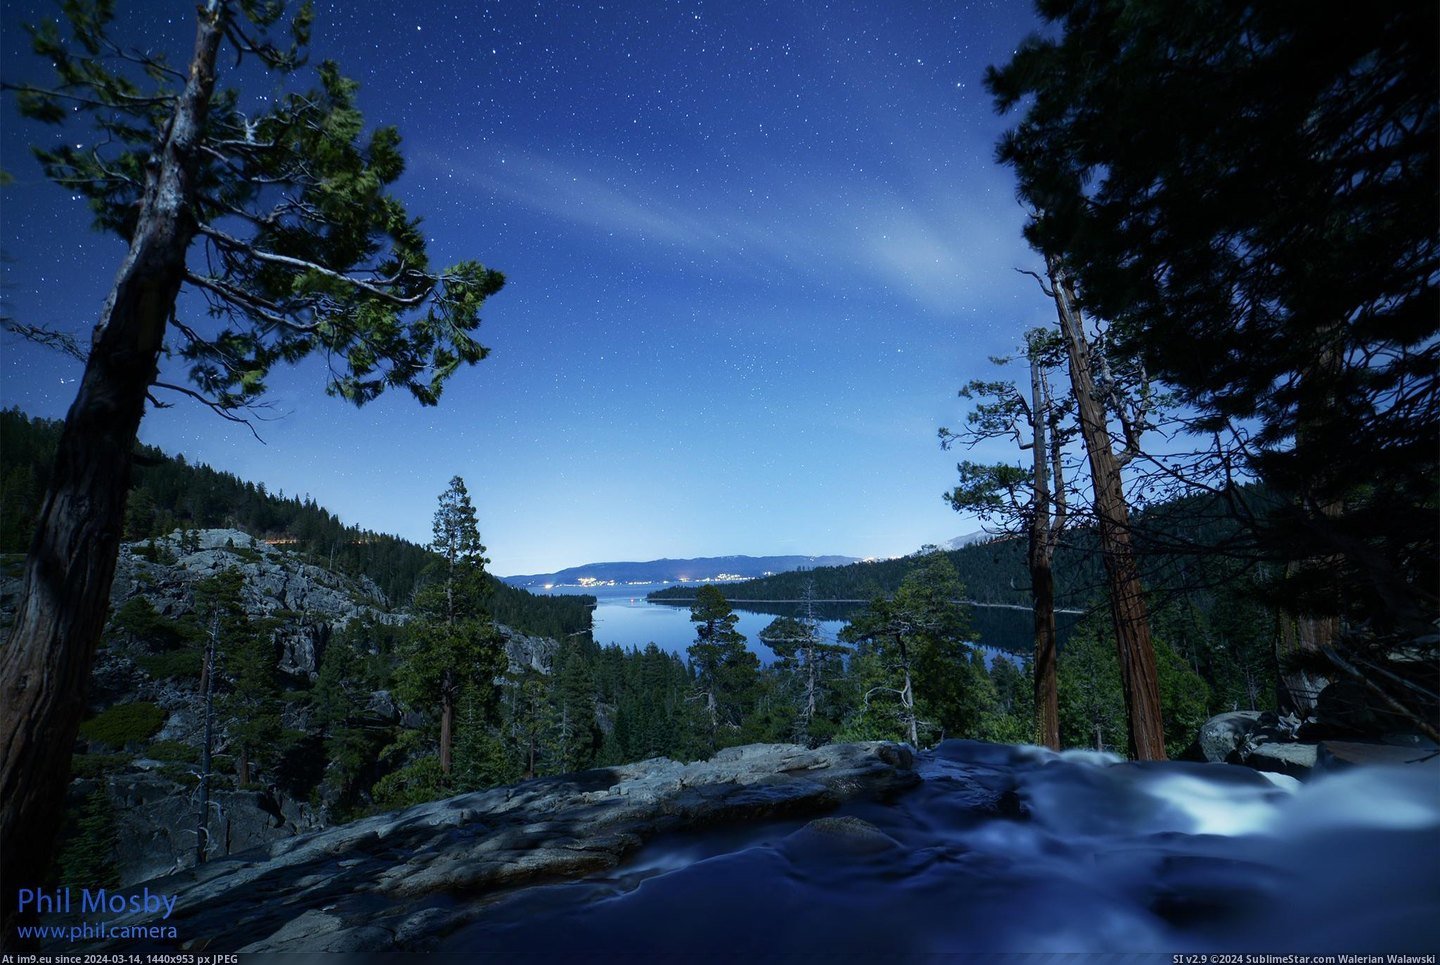 #Night #Lake #Falls #Tahoe #Emerald #2048x1367 #Phil #Bay #Stars #Eagle [Earthporn] Stars over Eagle Falls - Emerald Bay, Lake Tahoe, the night before last [oc by Phil Mosby][2048x1367] Pic. (Изображение из альбом My r/EARTHPORN favs))